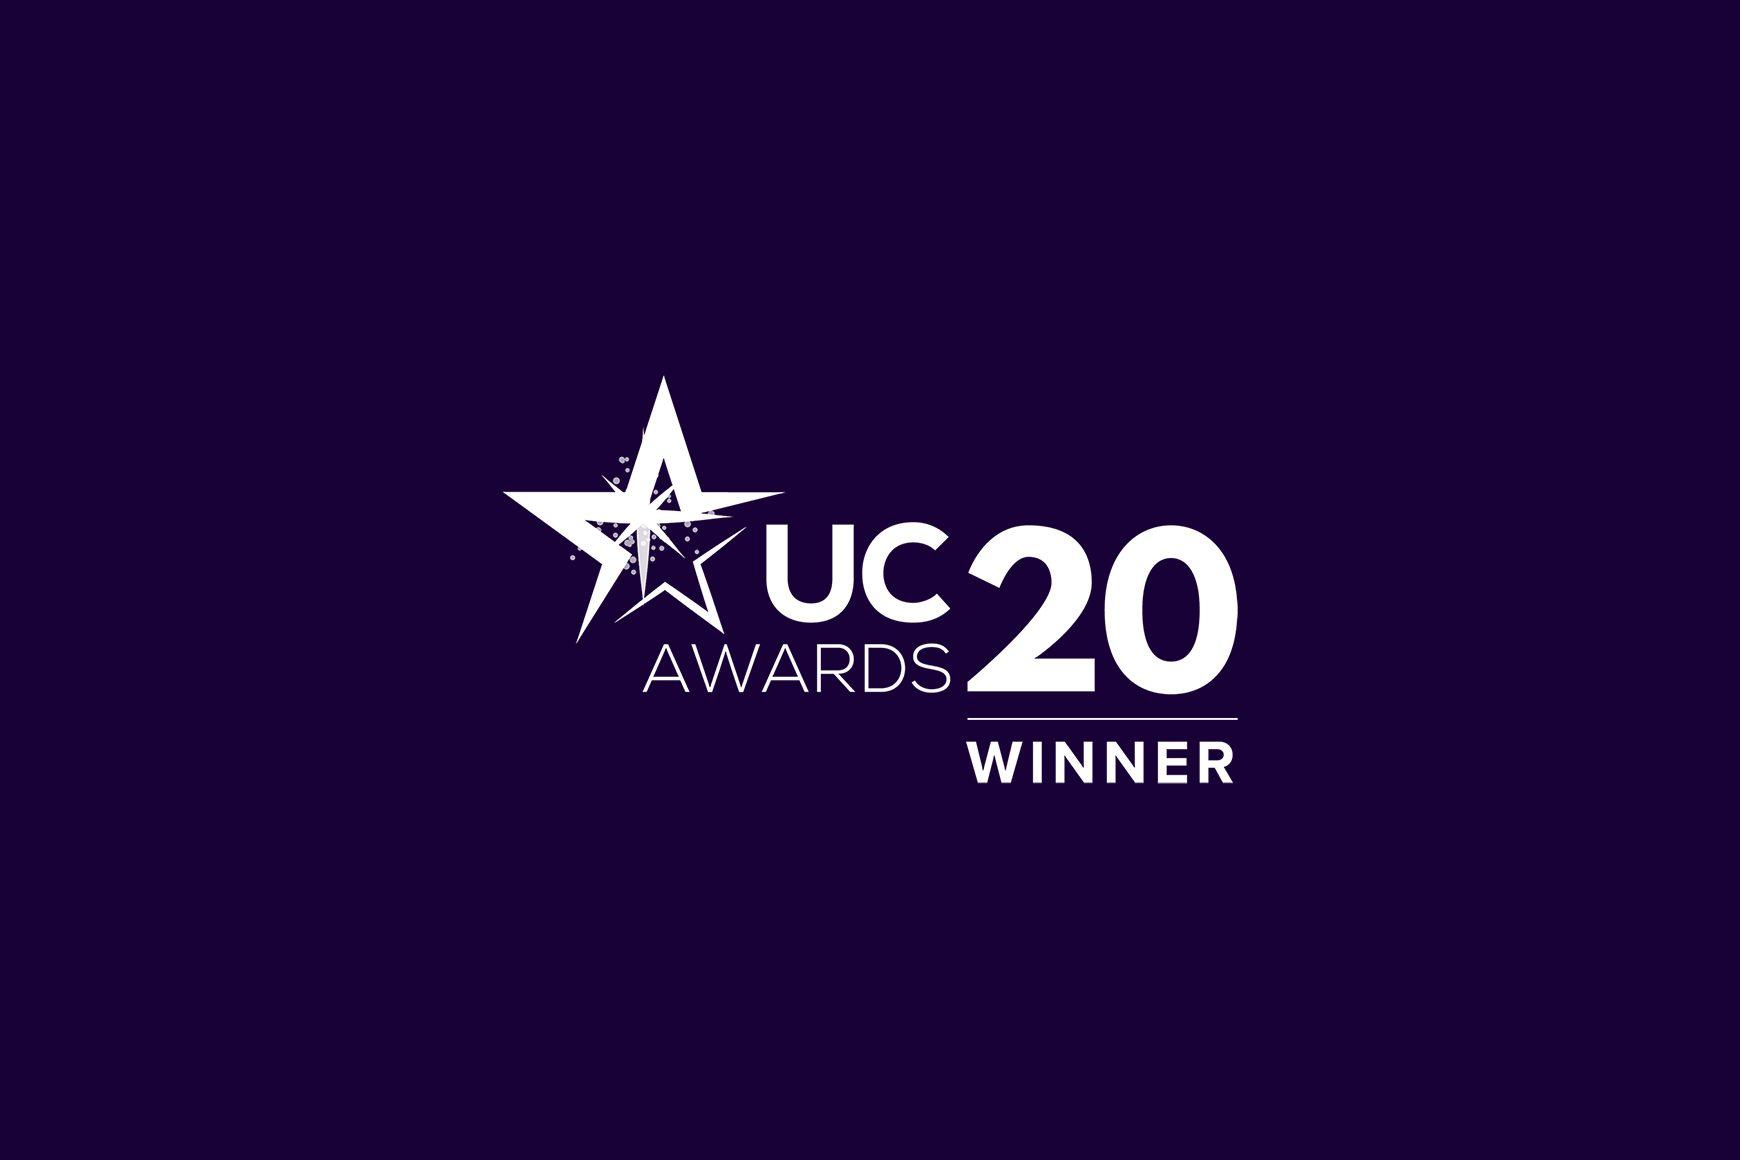 Talkdesk wins UC Awards 2020 for Best Contact Centre Platform and CX Leader of the Year